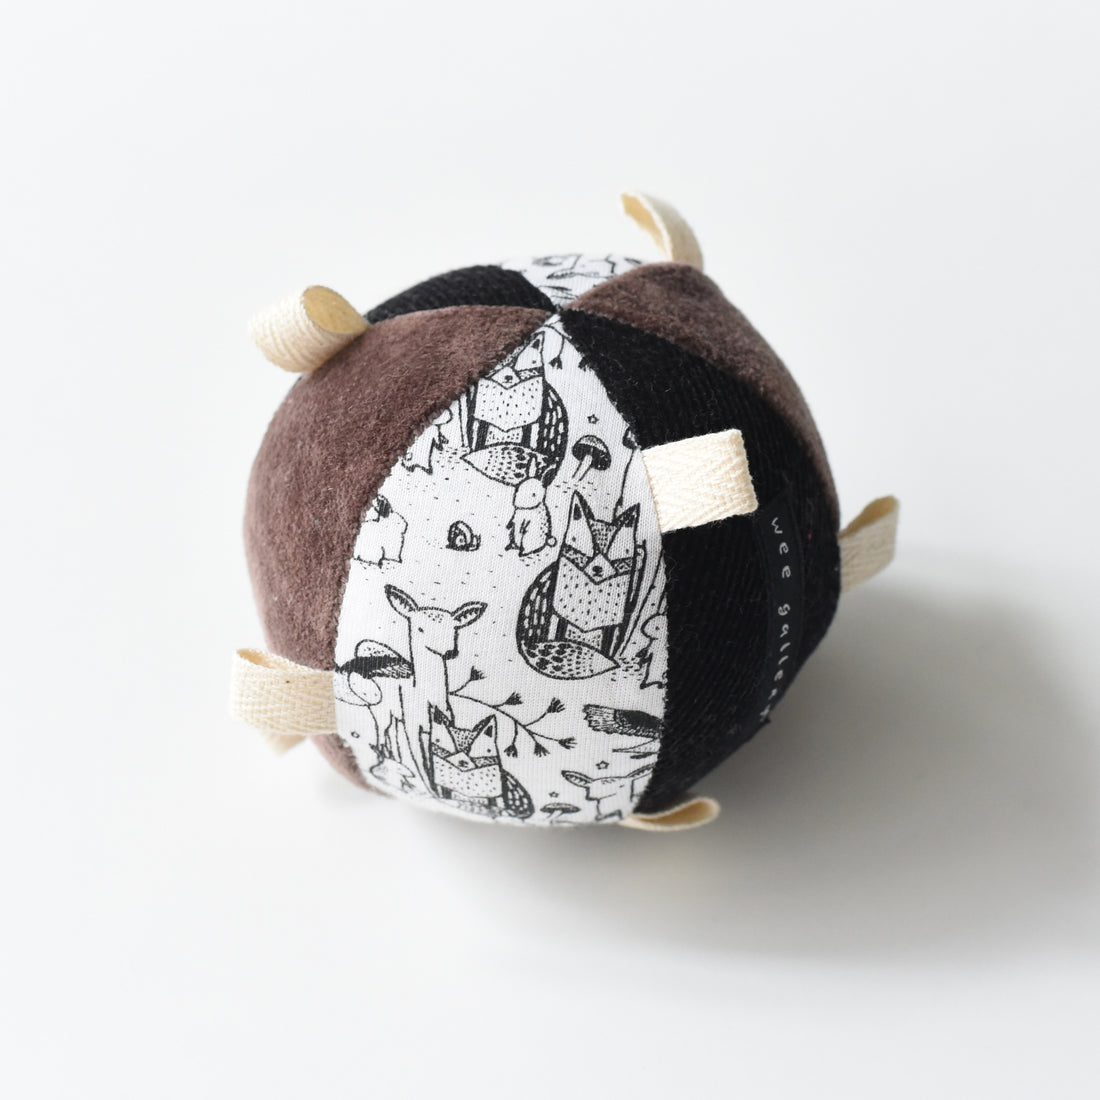 Taggy Ball with Rattle - Woodland